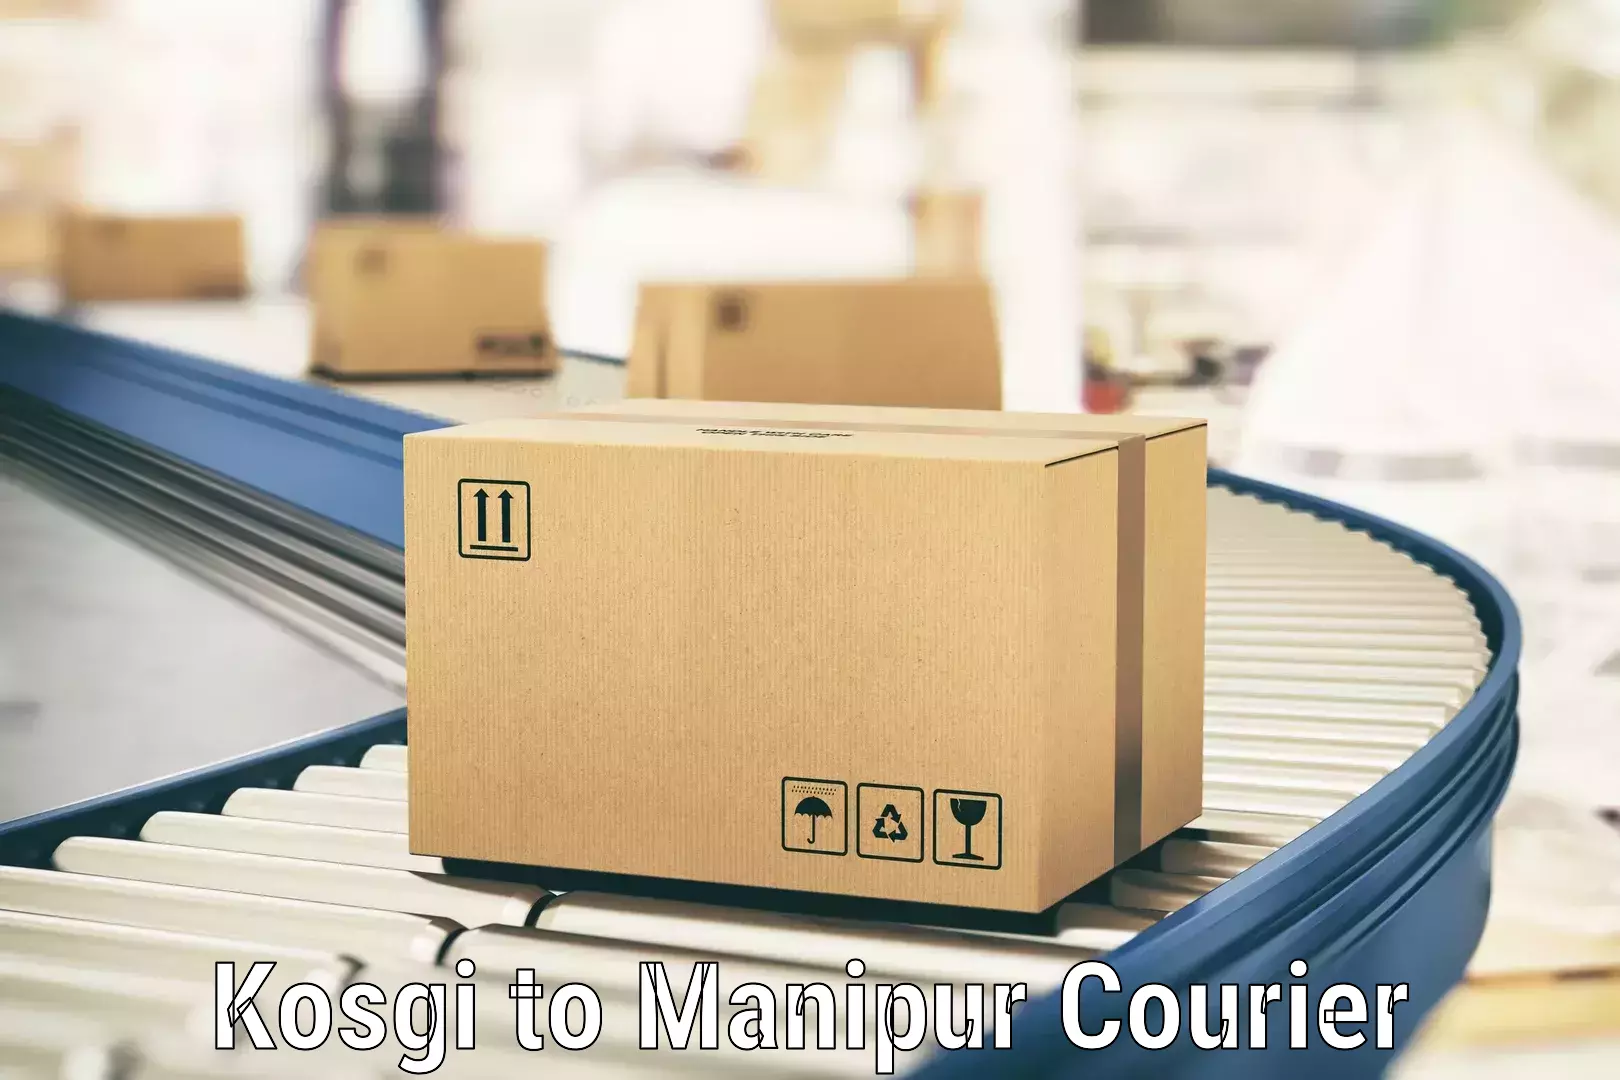 Subscription-based courier Kosgi to Manipur